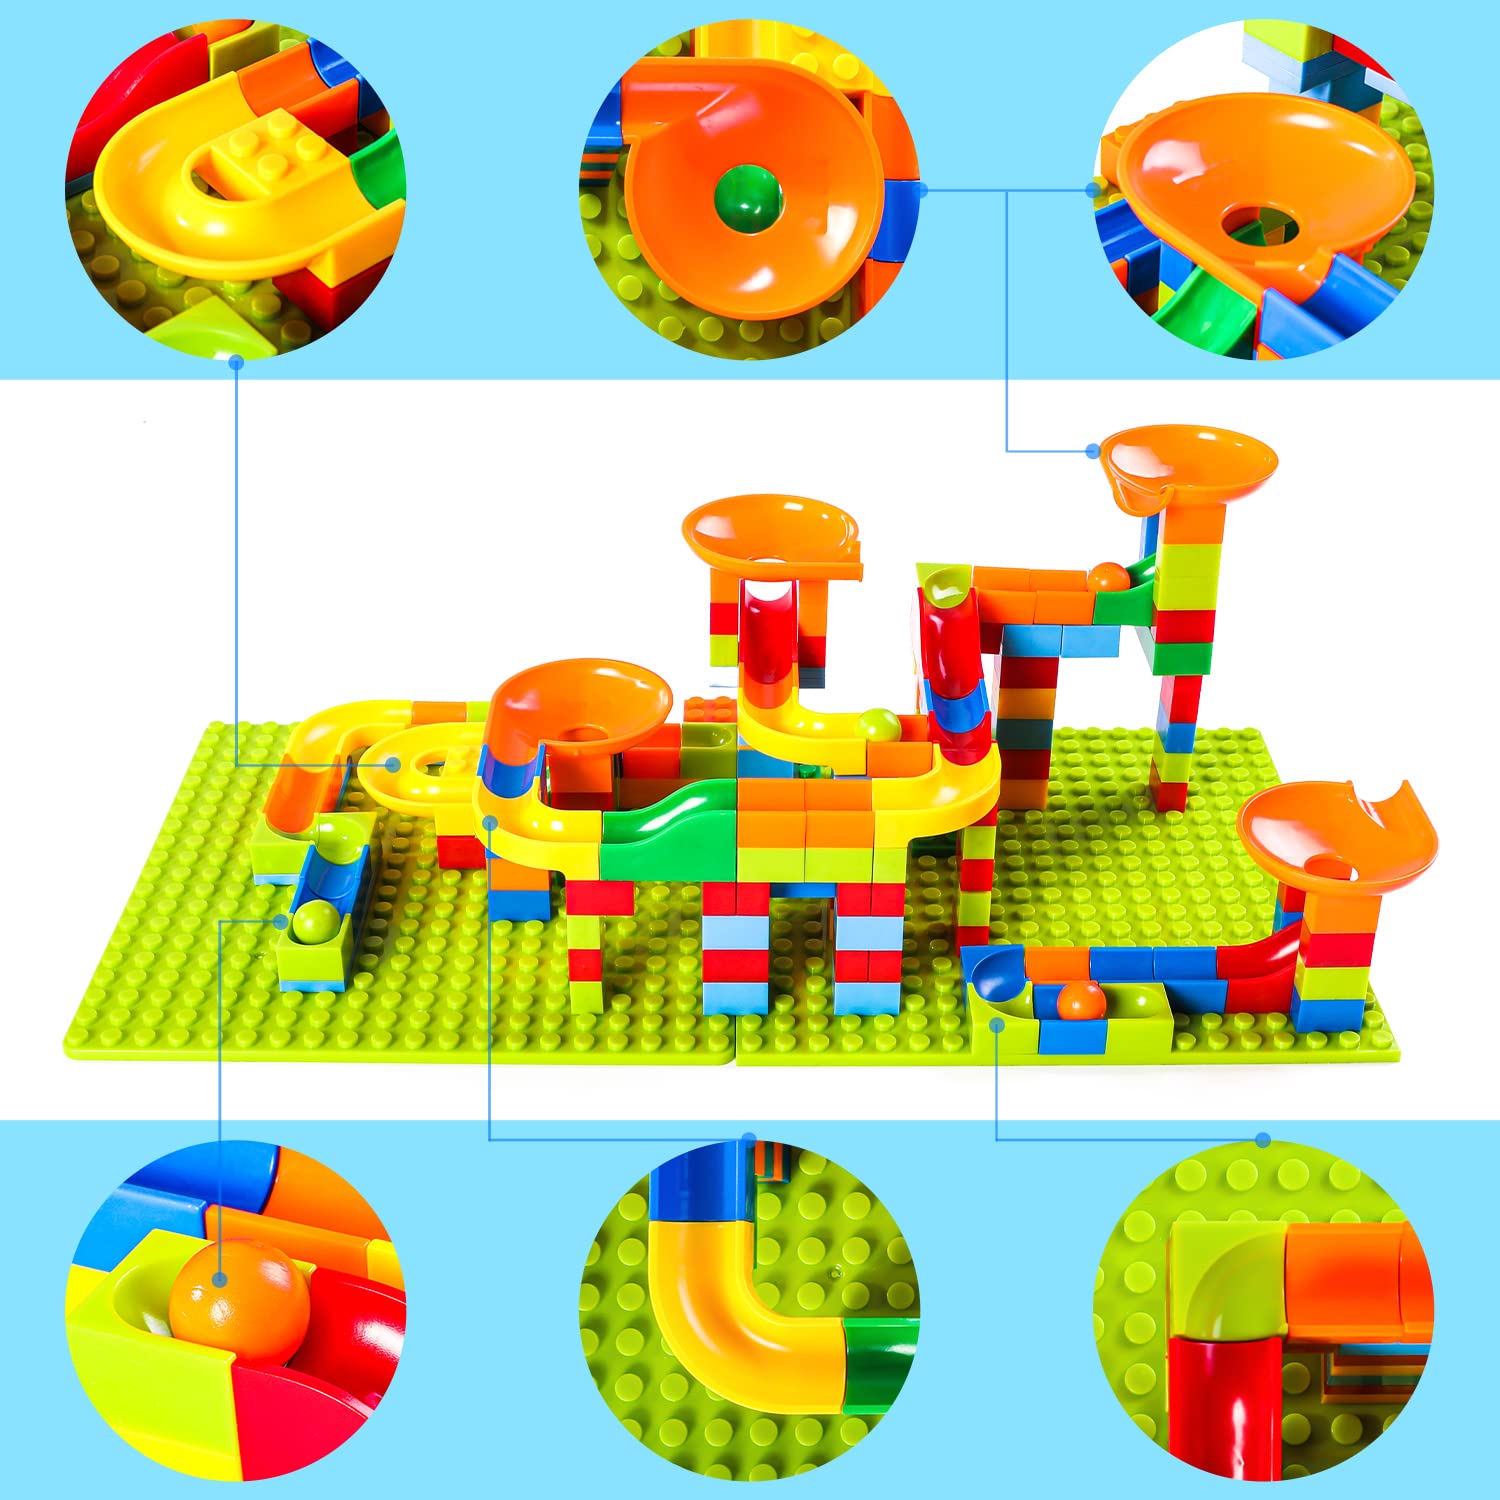 168 Pcs Marble Run Building Blocks Classic Blocks STEM Toy Bricks Set Kids Race Track Compatible Various Track Models with All Major Brands for 3+ Boys Girls Toddler